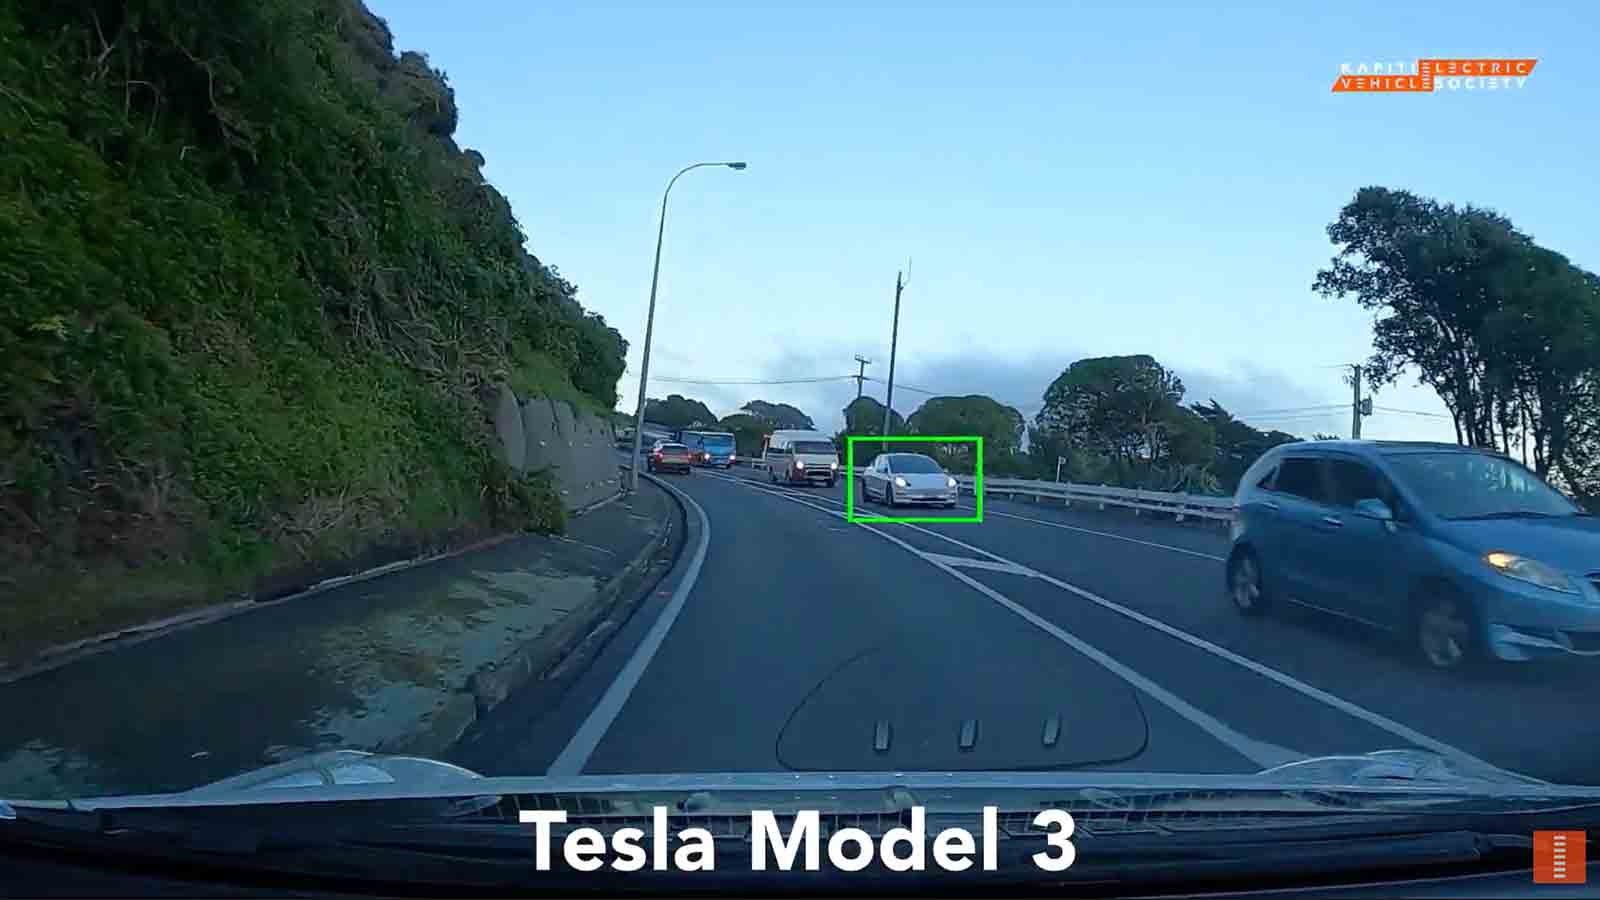 Screenshot from an Electric Vehicle Counting Report video